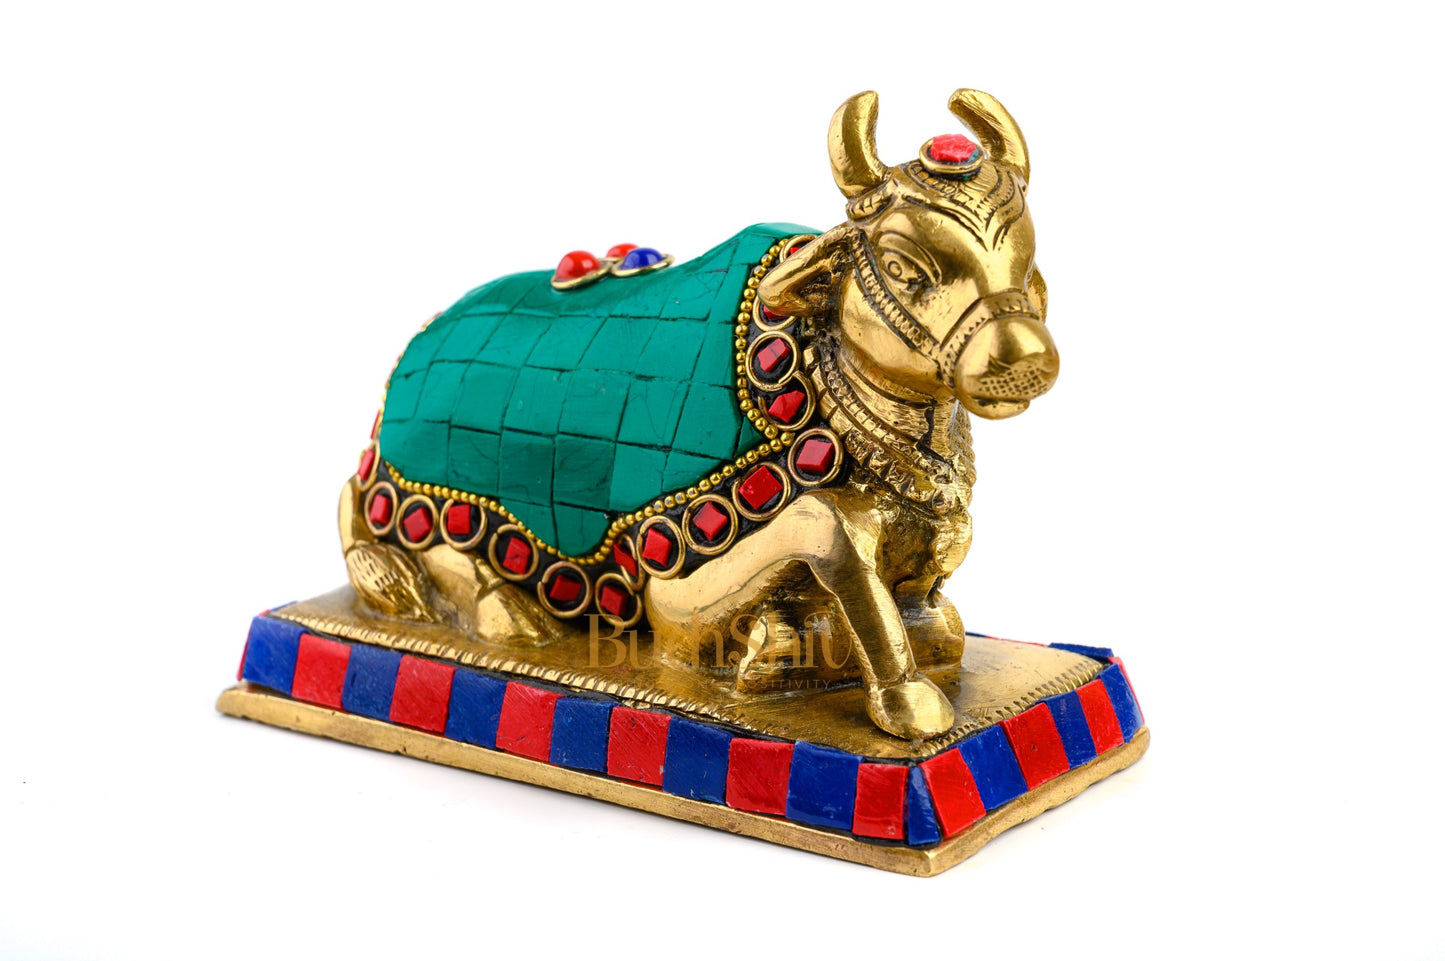 Nandi Bull Brass Statue Figure Idol for Home Office Workplace Temple